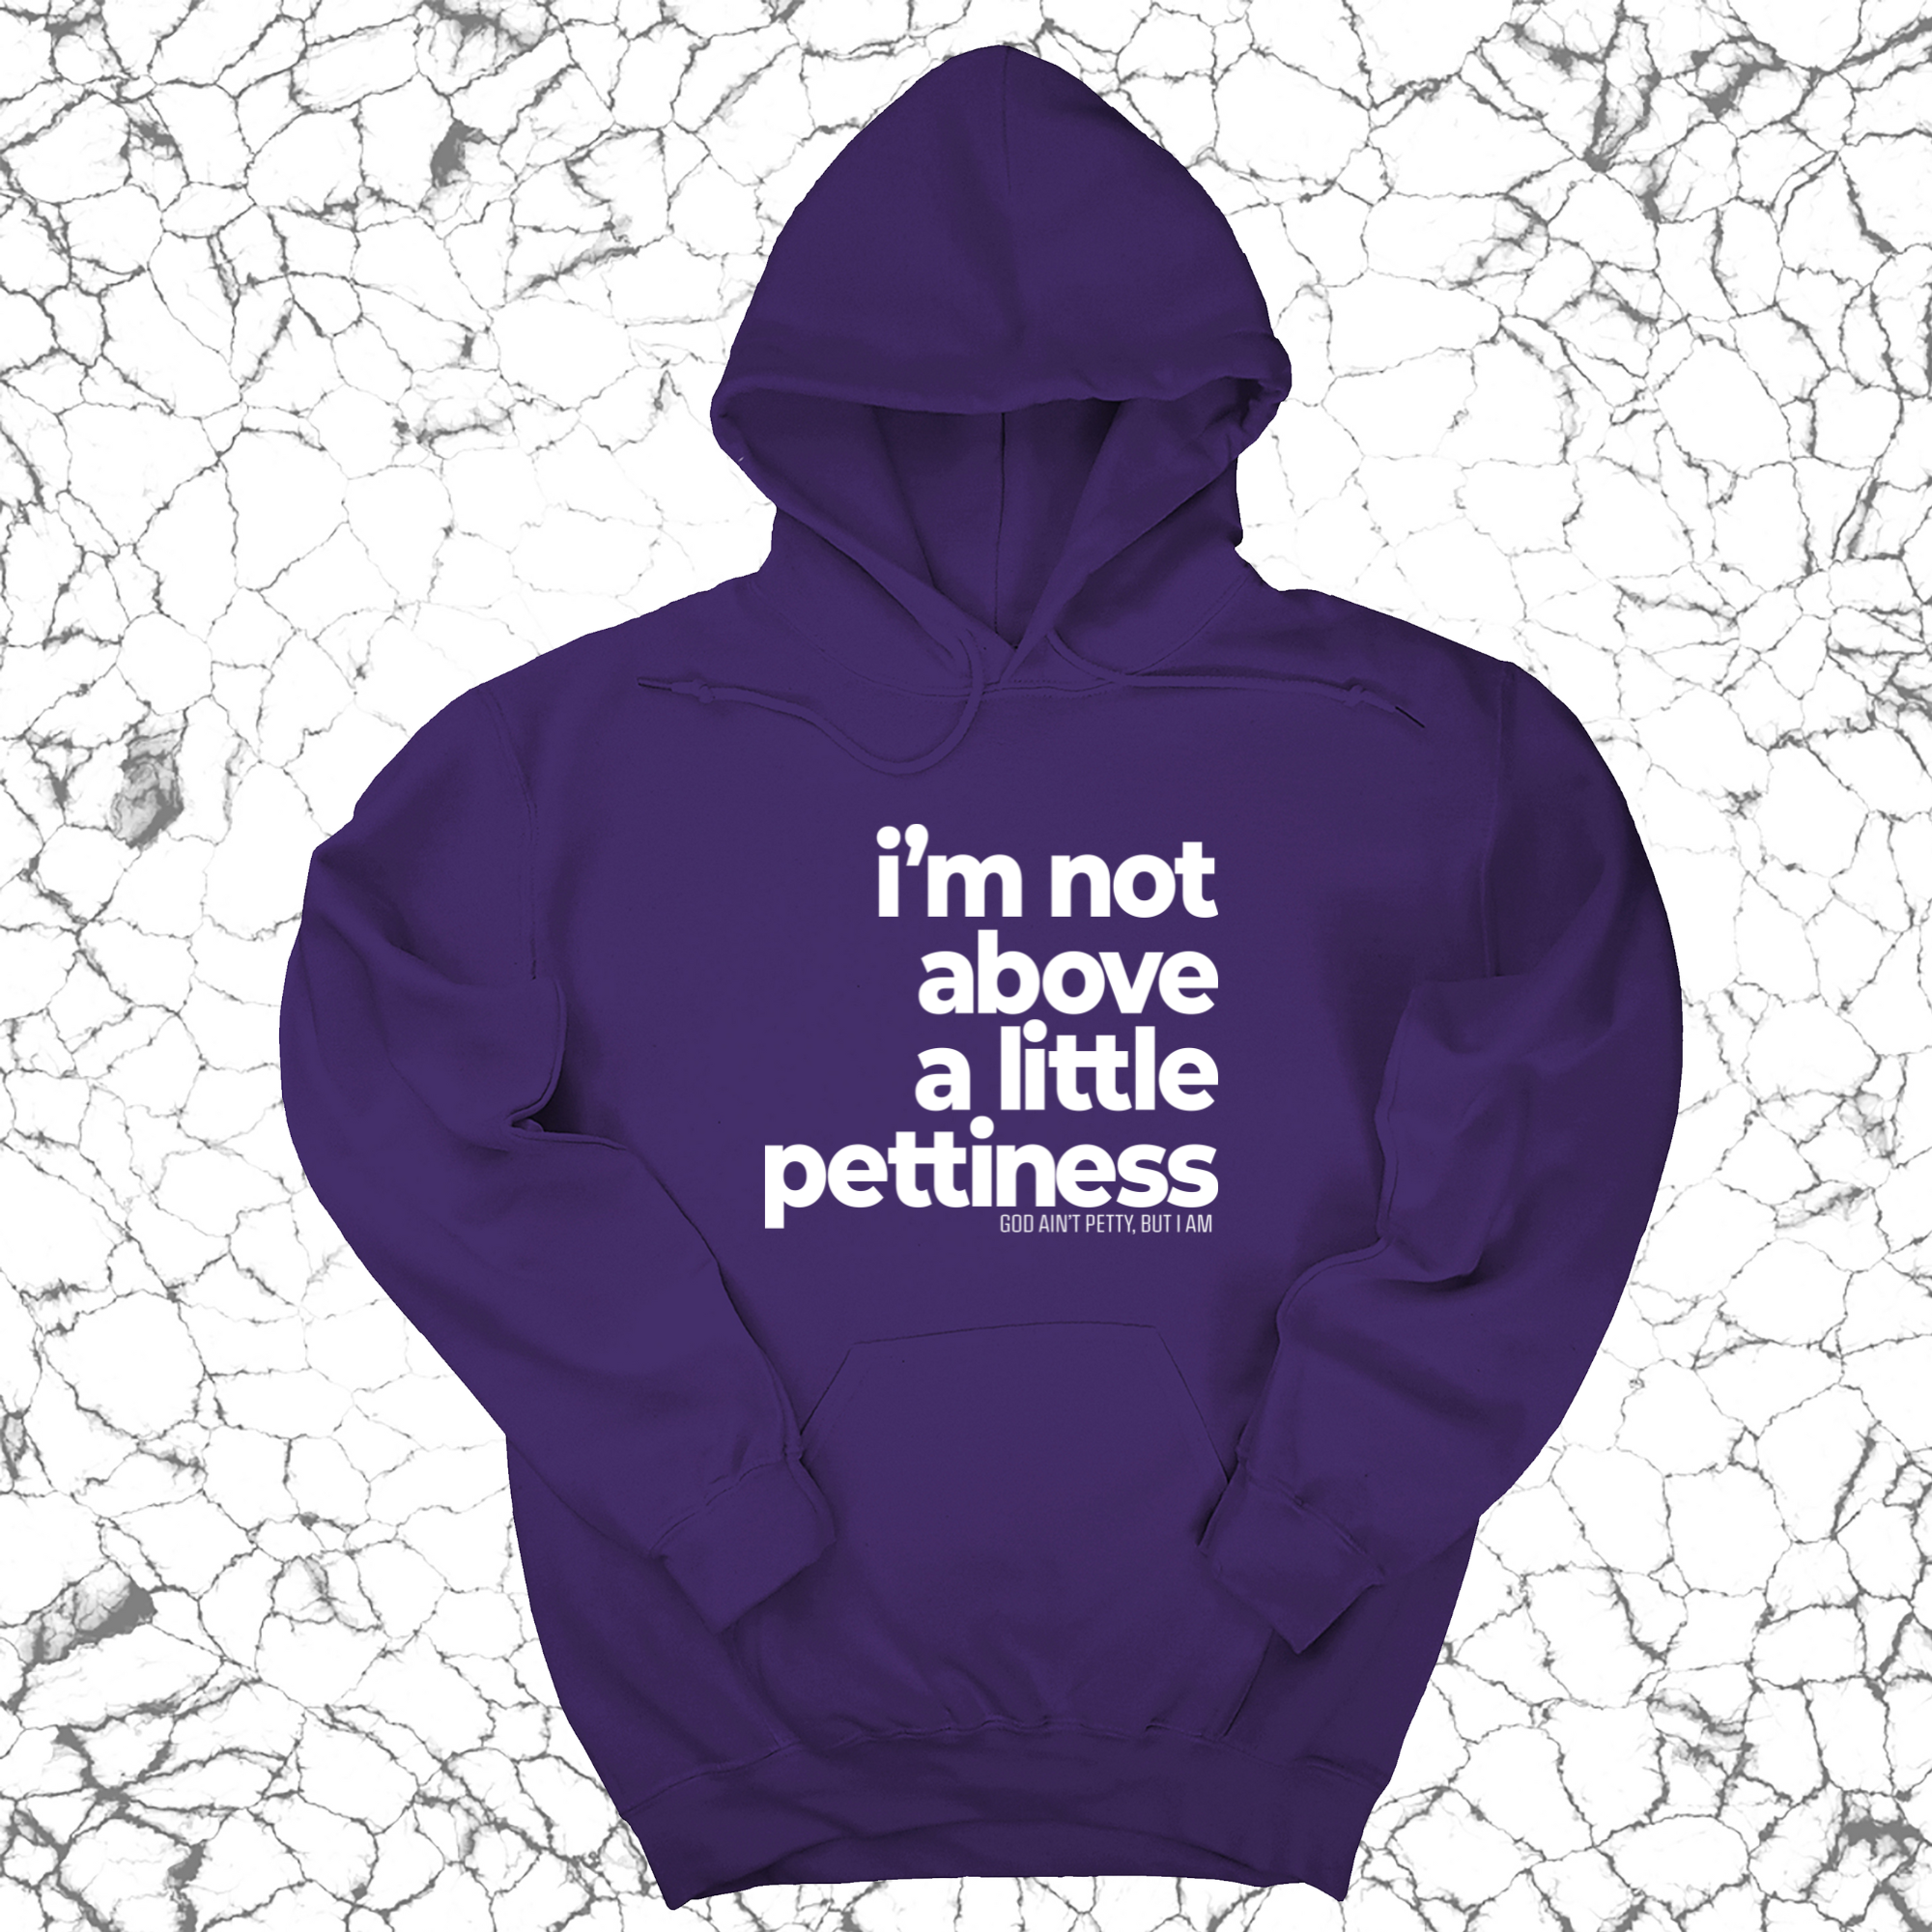 I'm not above a little pettiness Unisex Hoodie-Hoodie-The Original God Ain't Petty But I Am